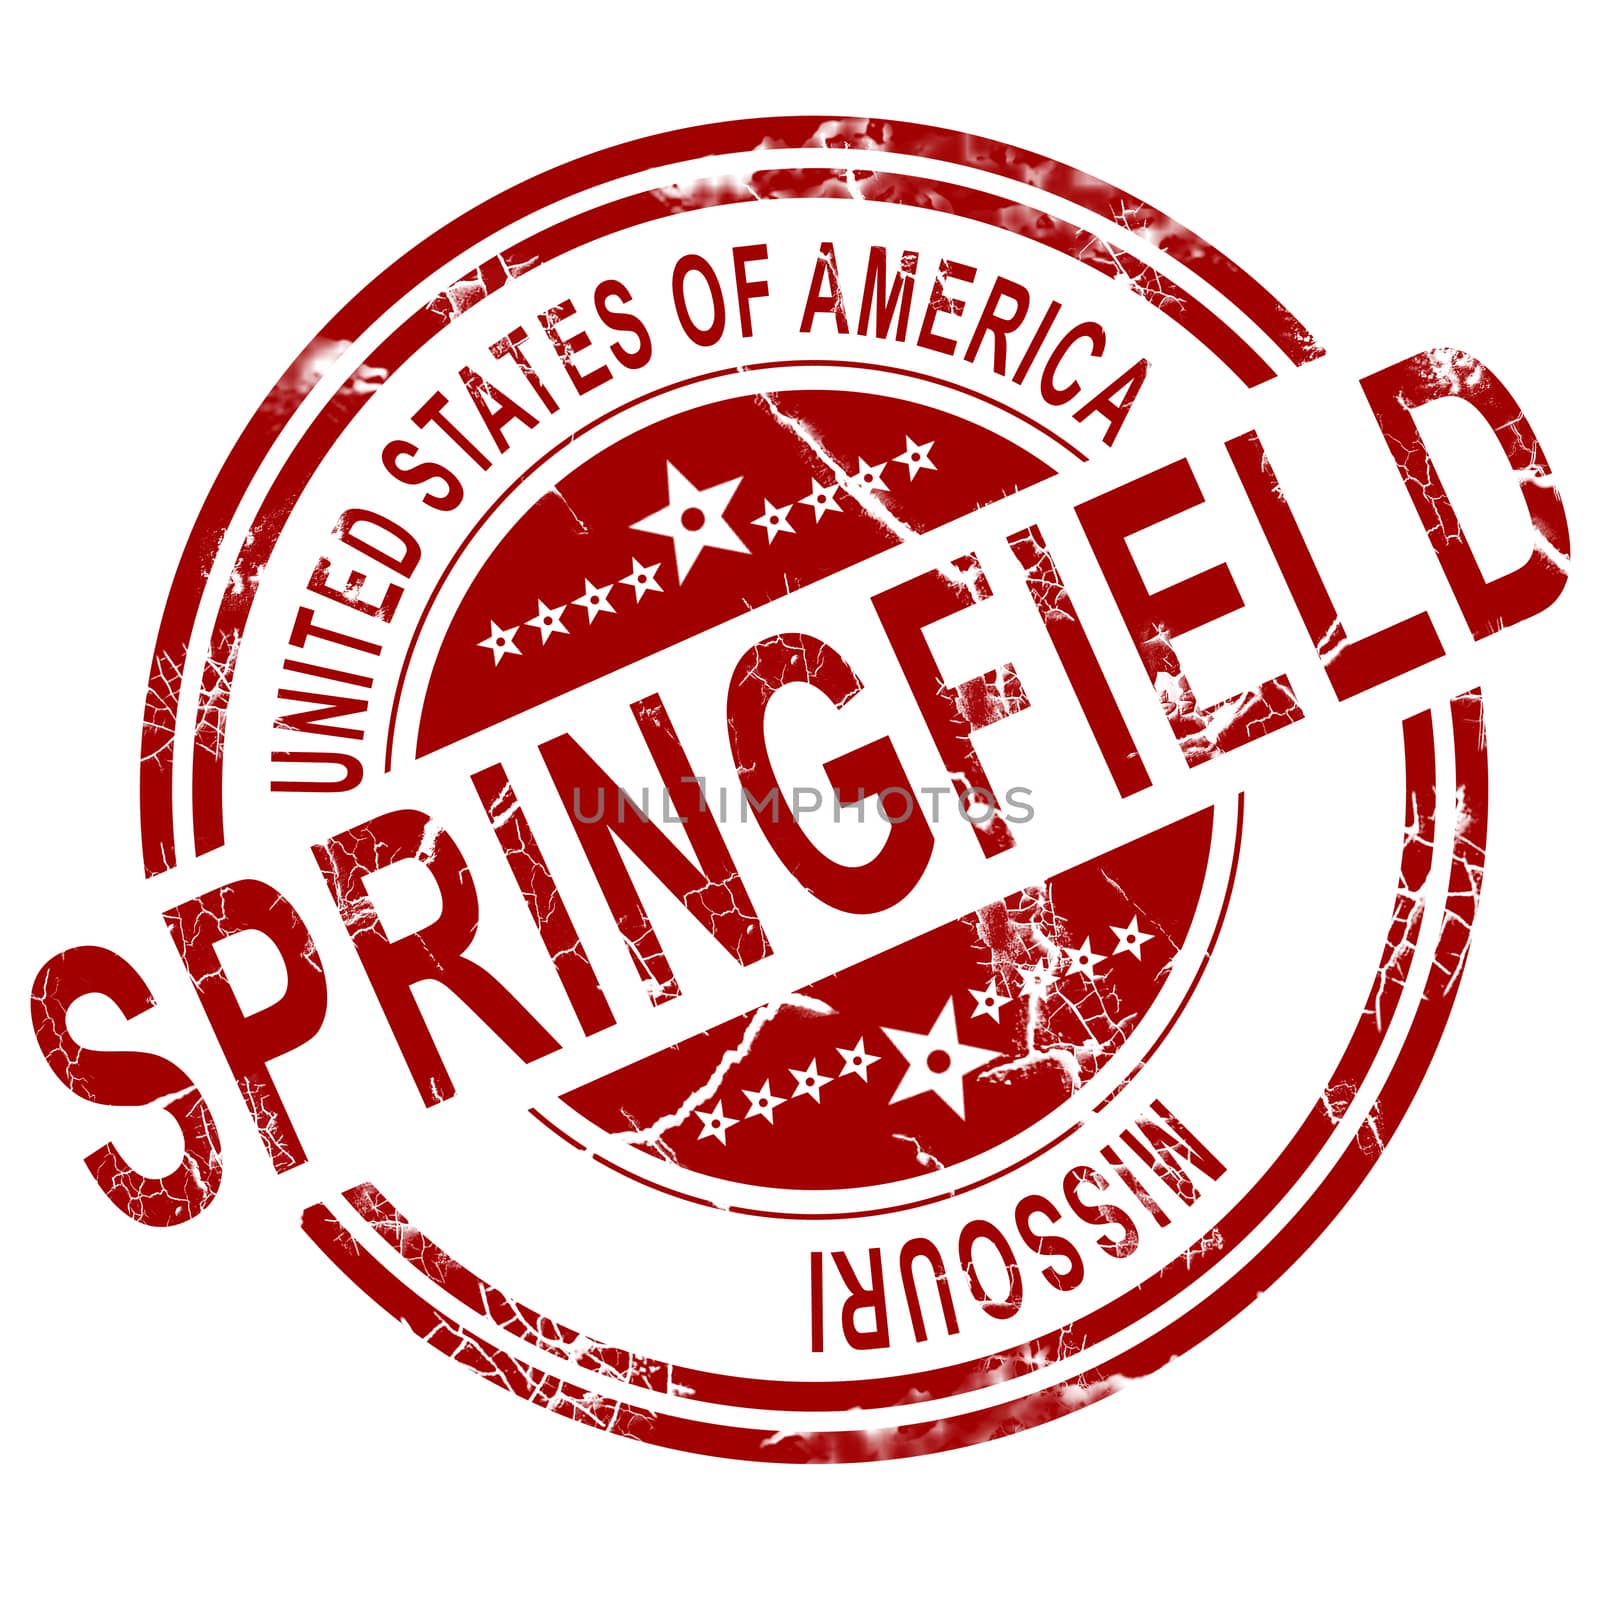 Springfield Missouri stamp with white background by tang90246